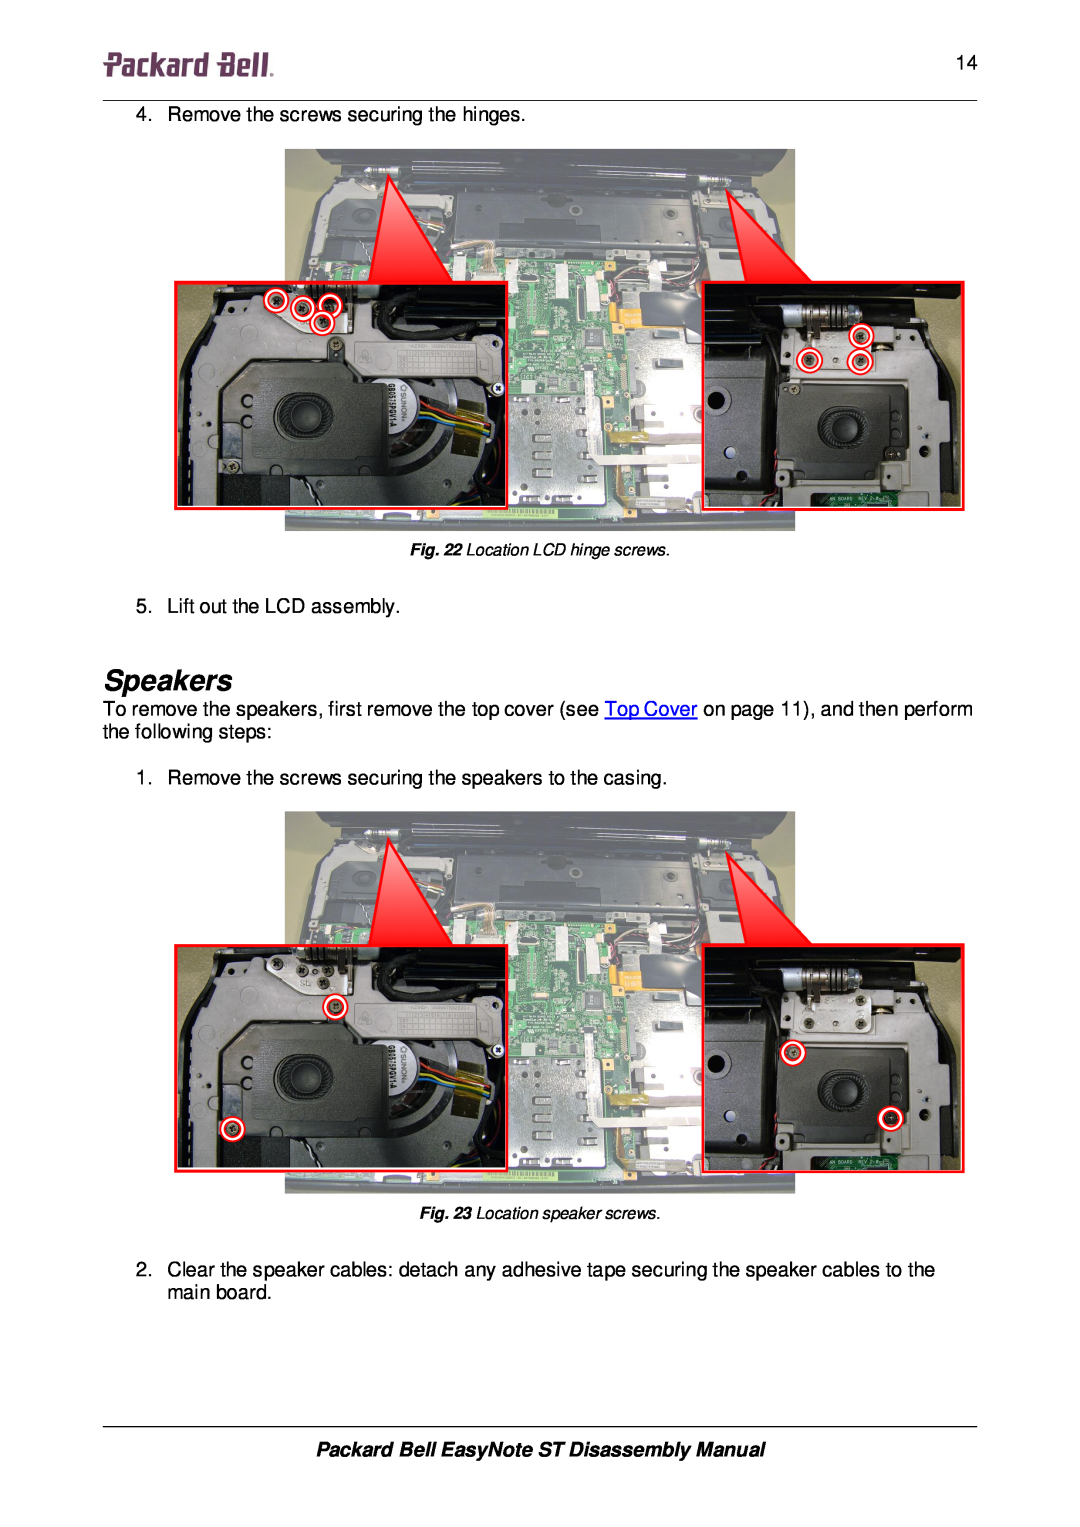 Packard Bell manual Speakers, Packard Bell EasyNote ST Disassembly Manual 